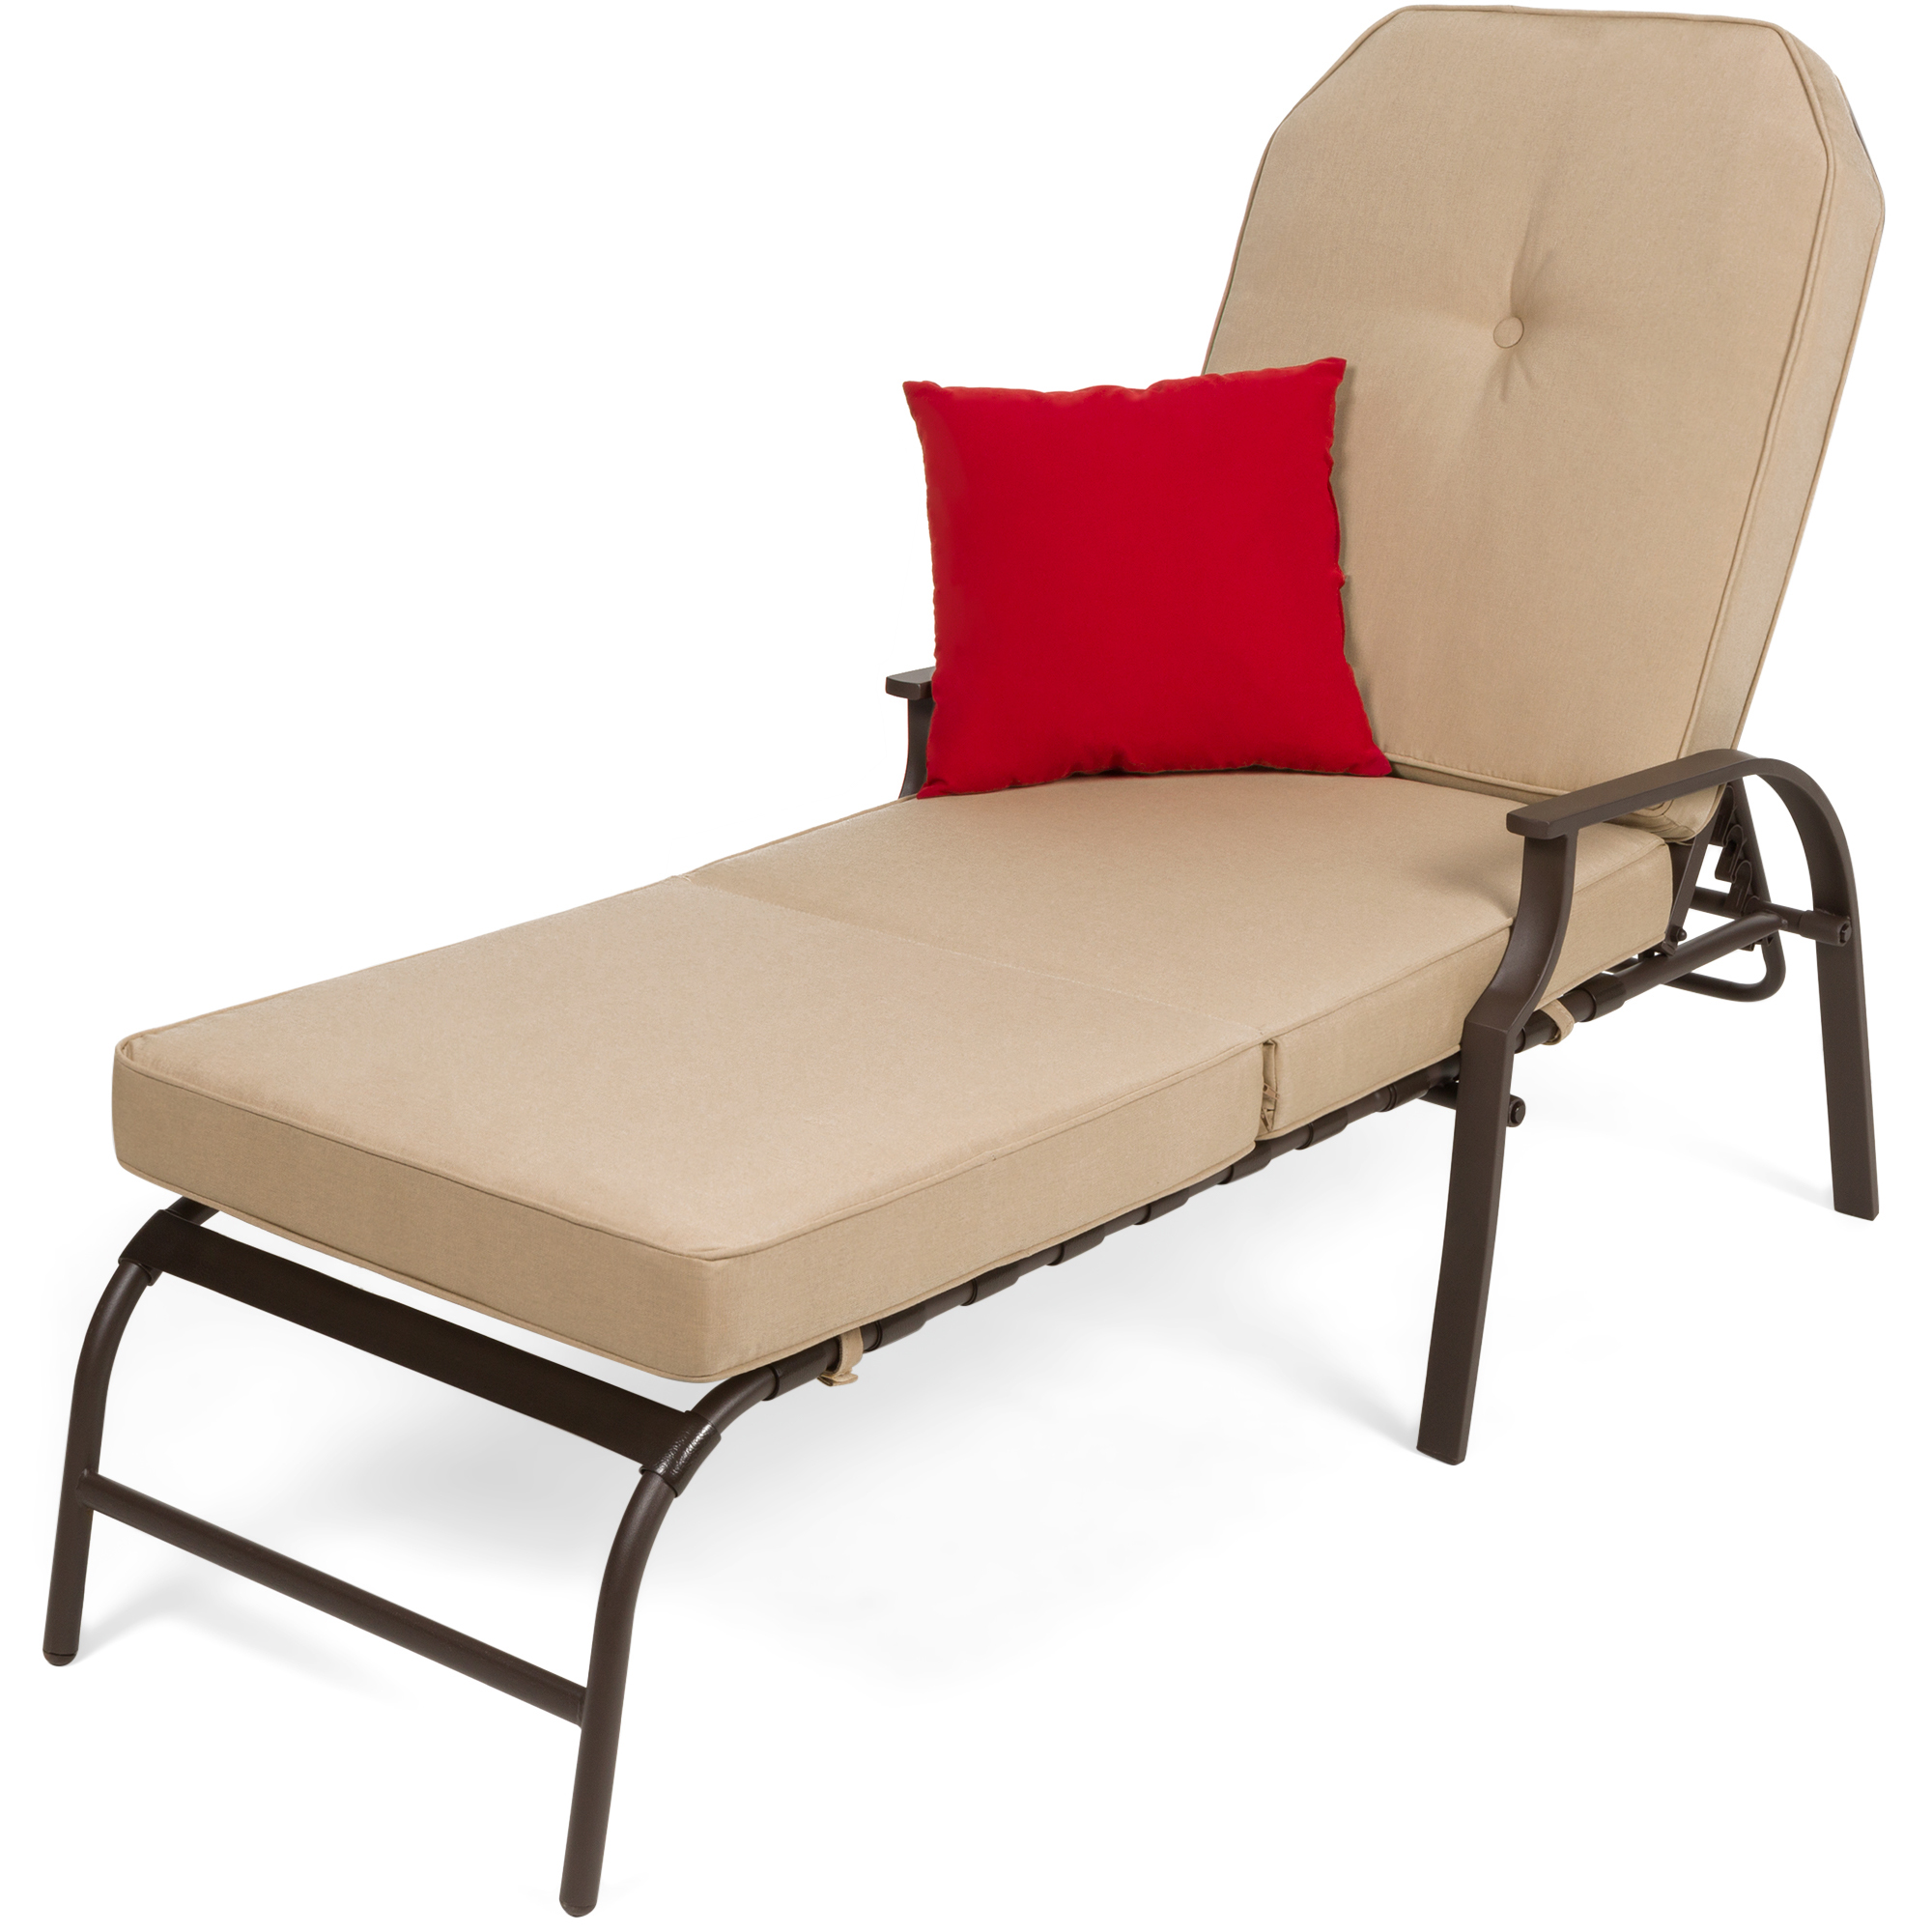 Best Choice Products Adjustable Outdoor Chaise Lounge Chair for Patio, Poolside w/ UV-Resistant Cushion - Brown/Beige - image 1 of 7